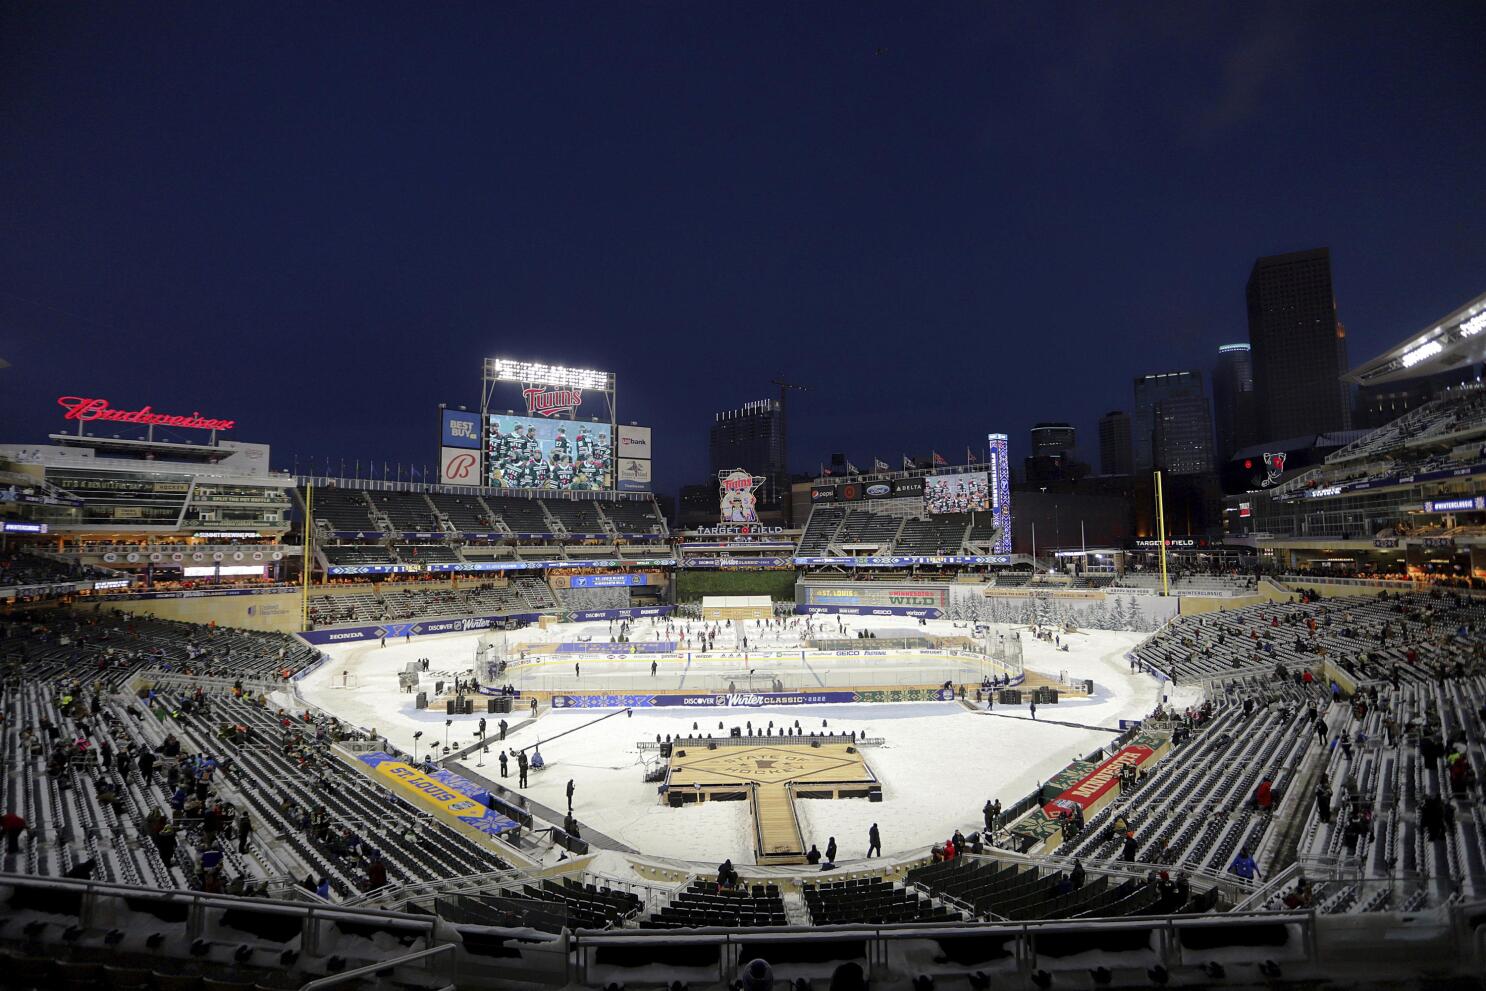 Blues defeat Wild 6-4 in 2022 Winter Classic, coldest game in NHL